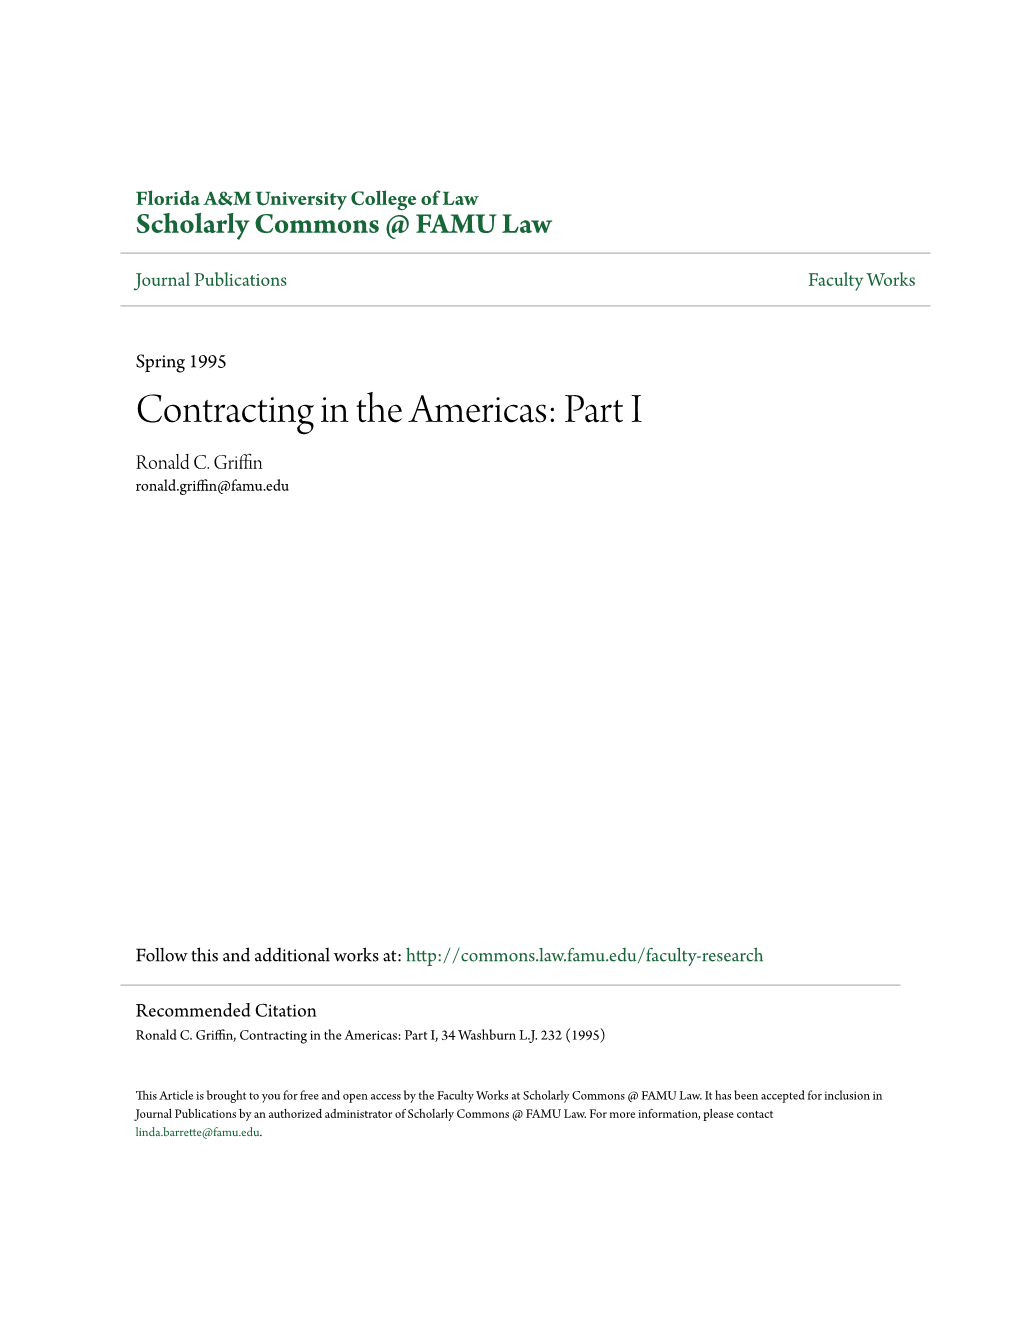 Contracting in the Americas: Part I Ronald C